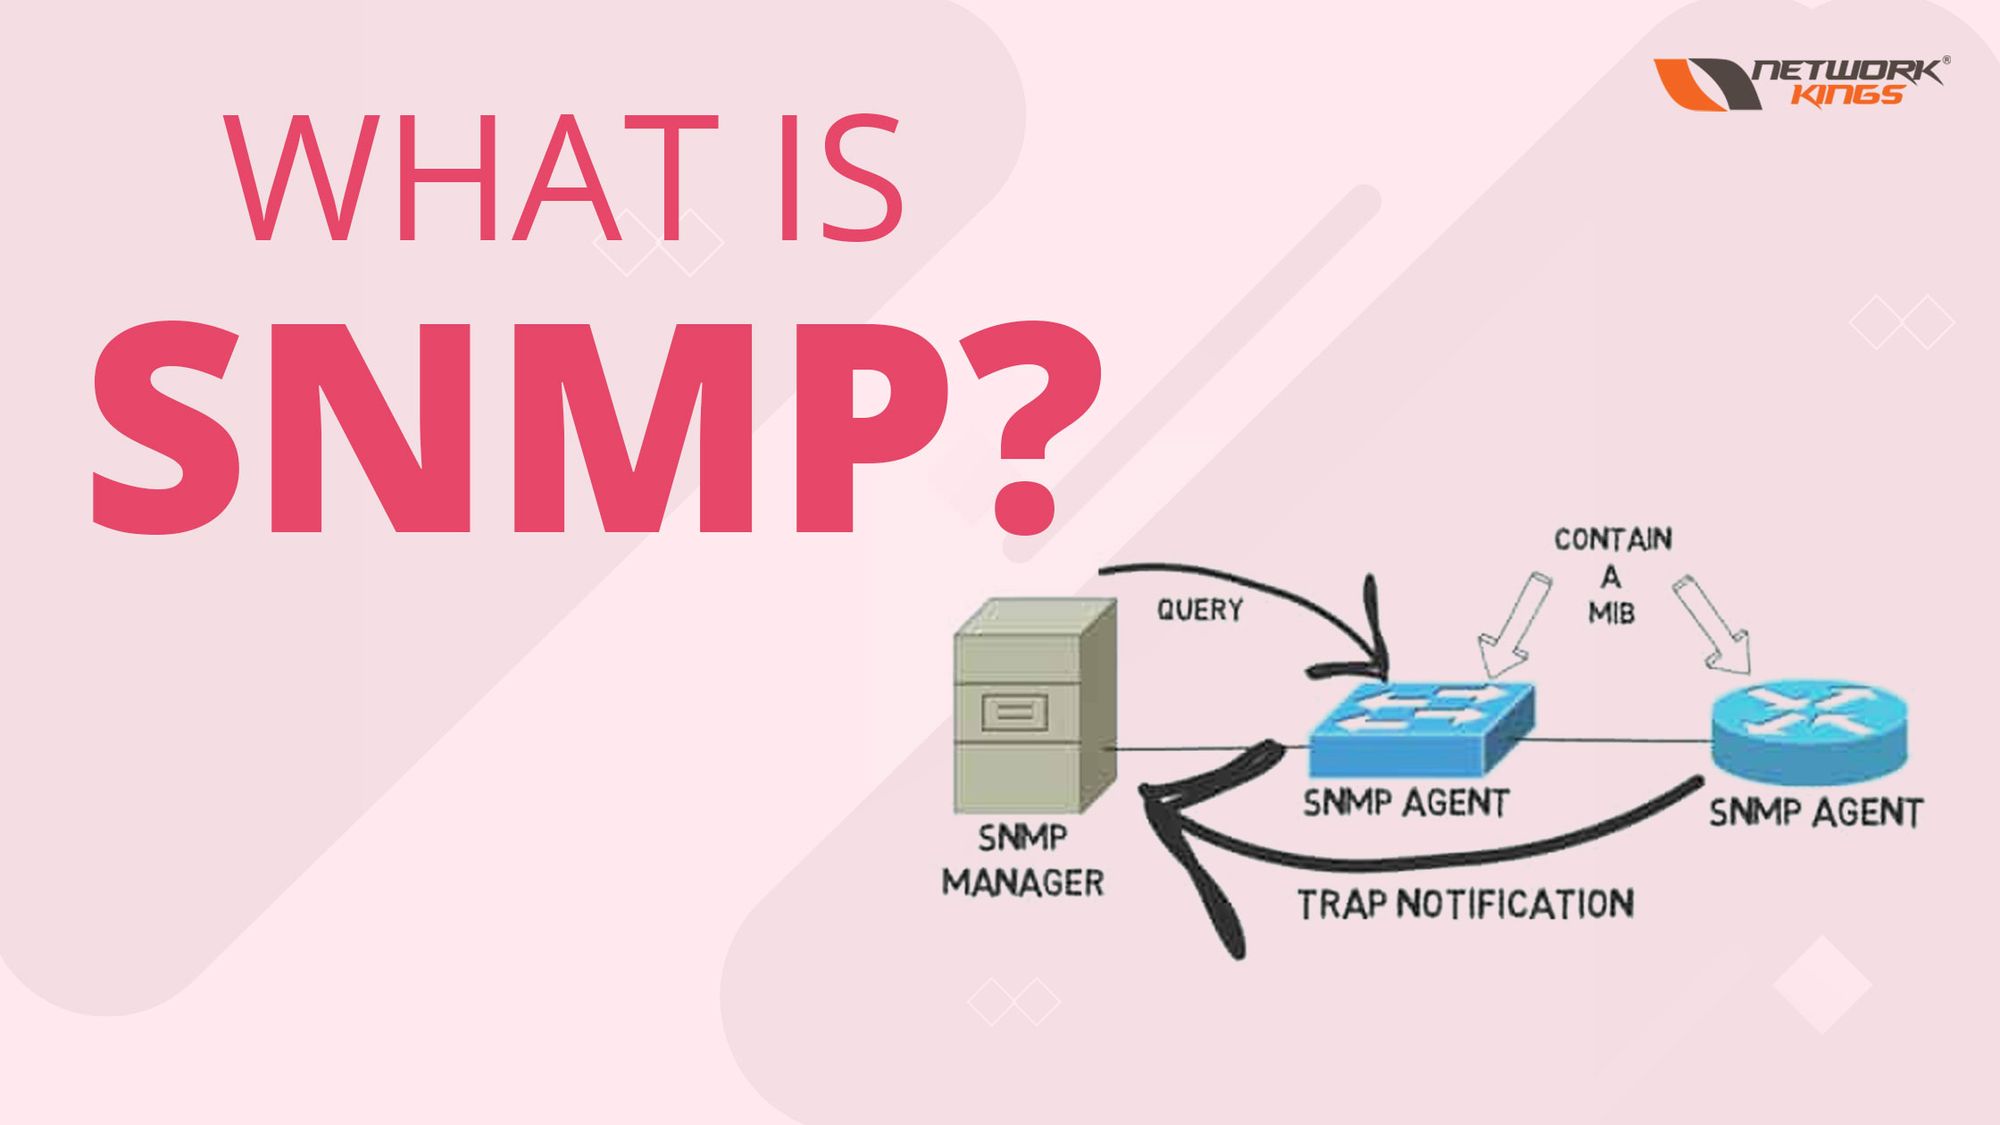 What is SNMP?